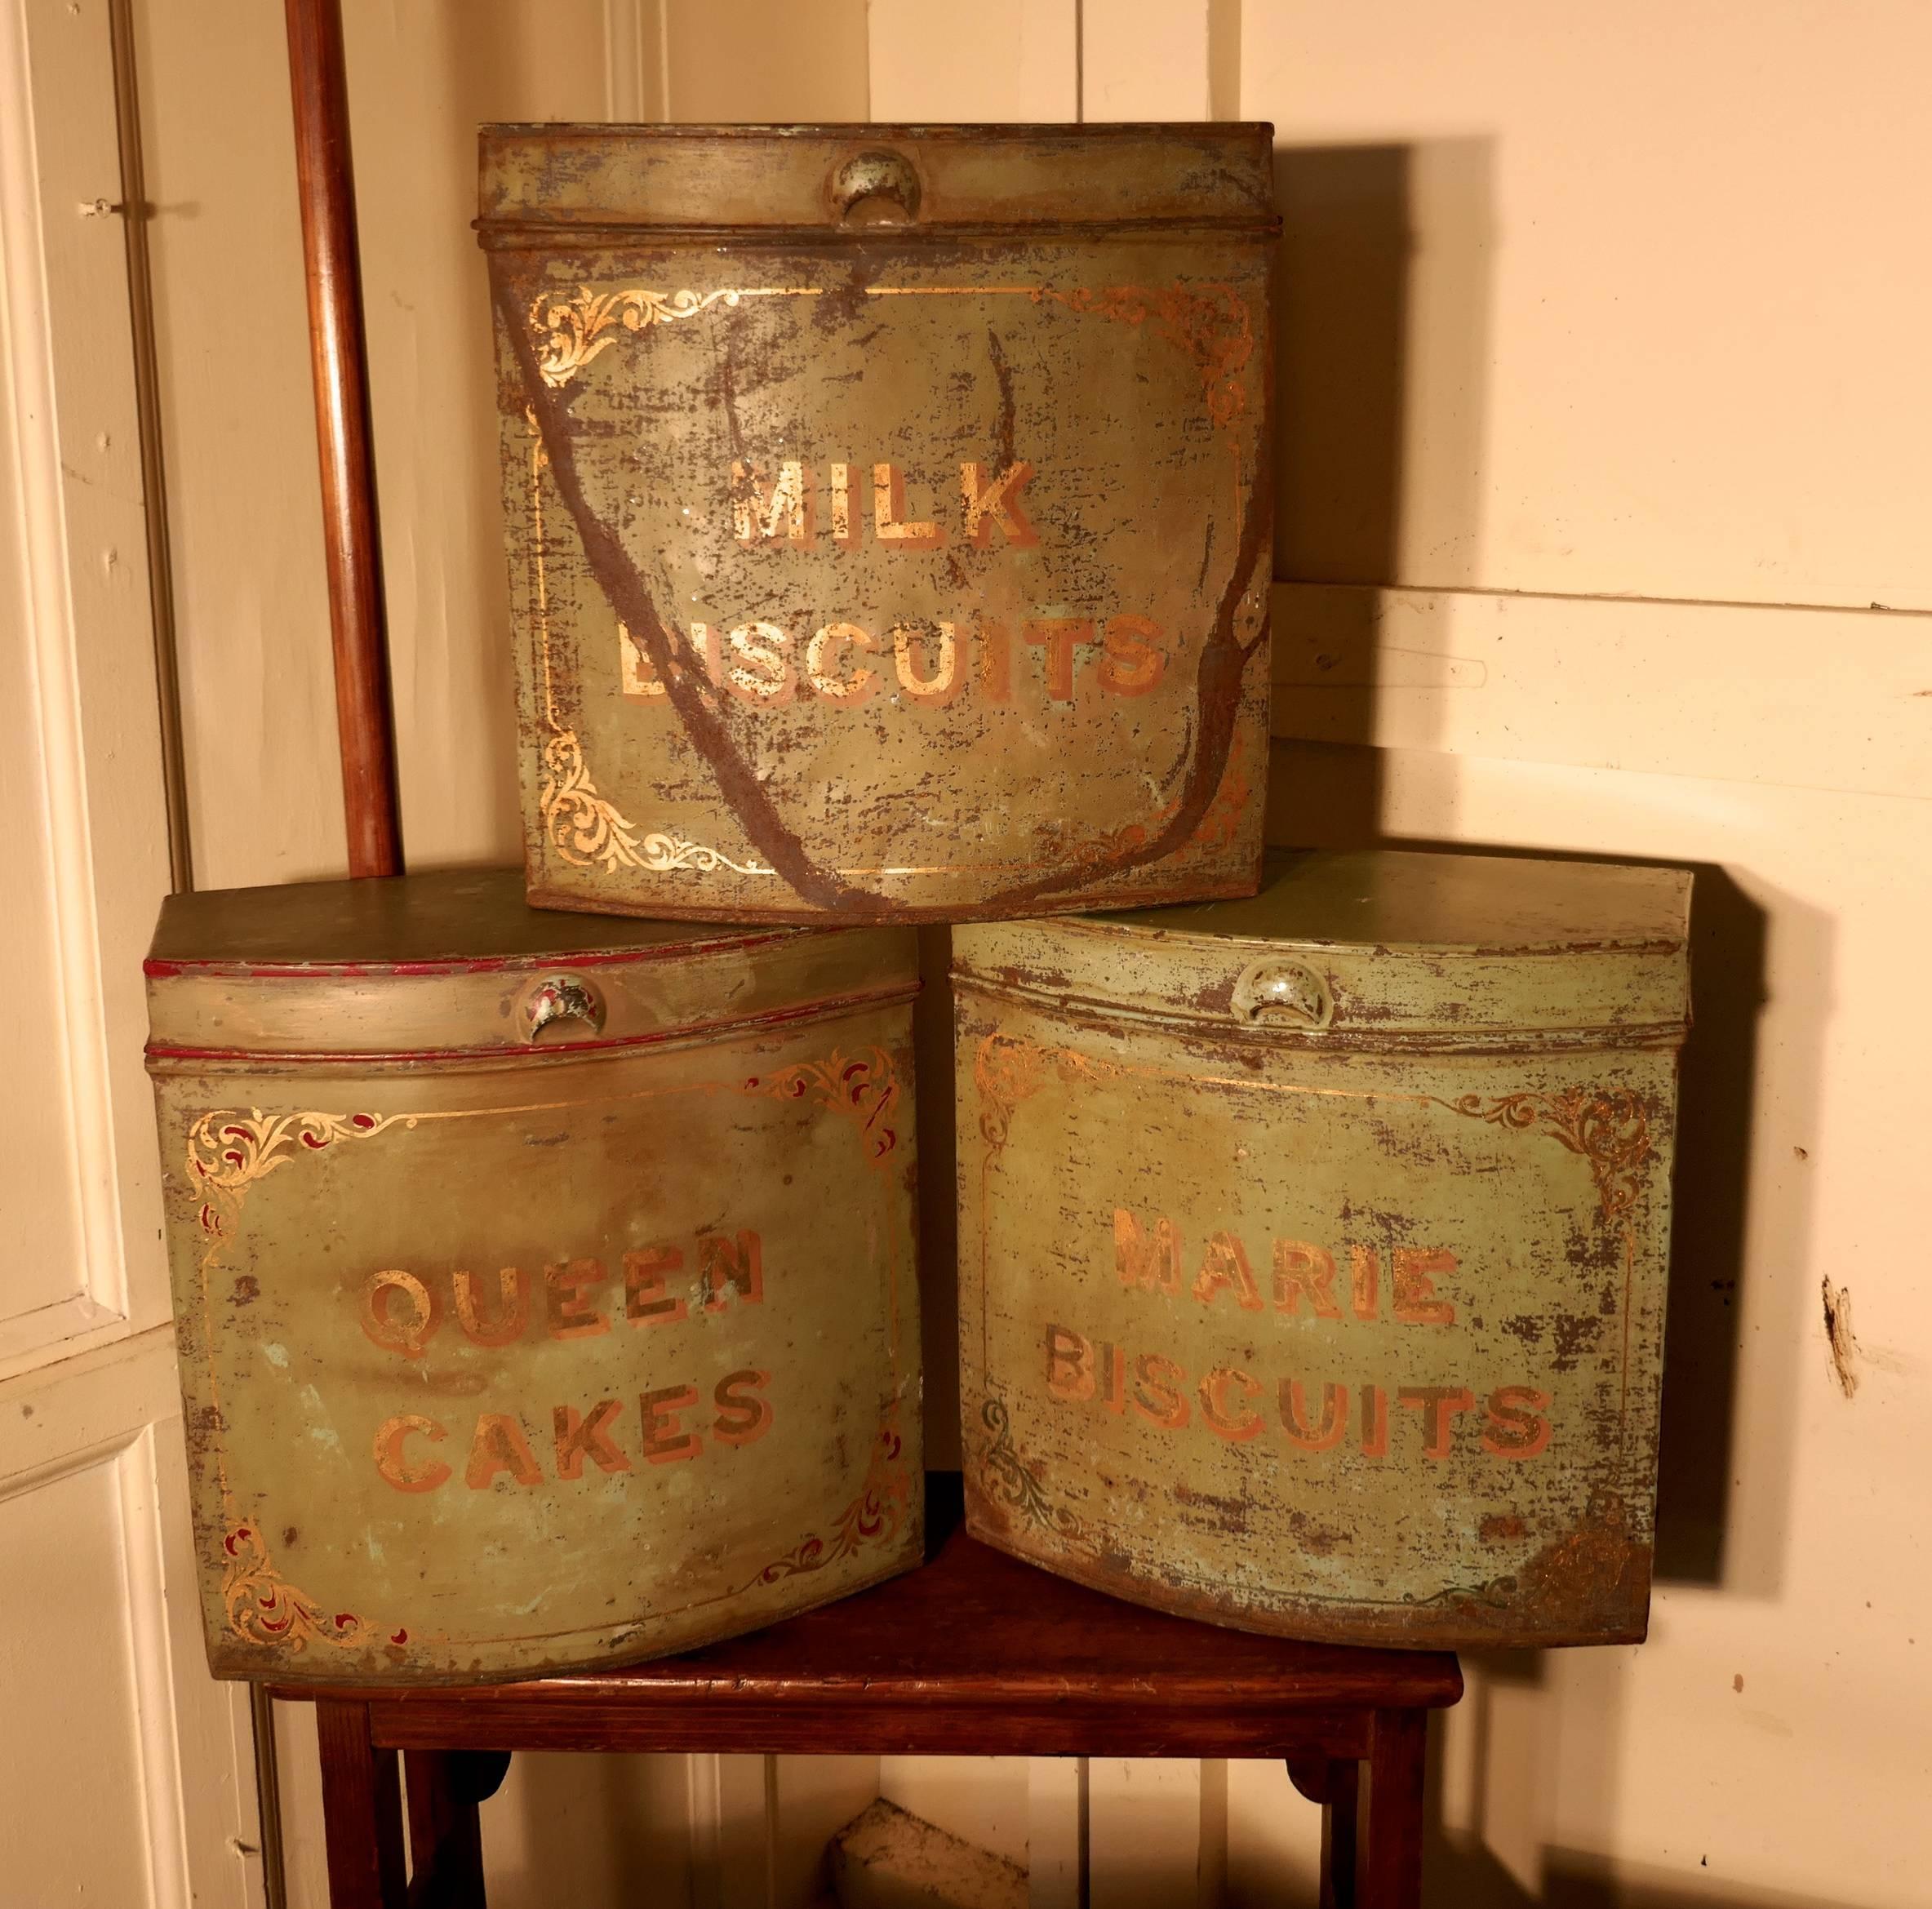 Five large Victorian Baker’s shop tins, toleware biscuit canisters

This is an amazing find, five matching 19th century Bakers biscuit tins, these are larger than the domestic type of storage tins, they are in a light green color, the name of each